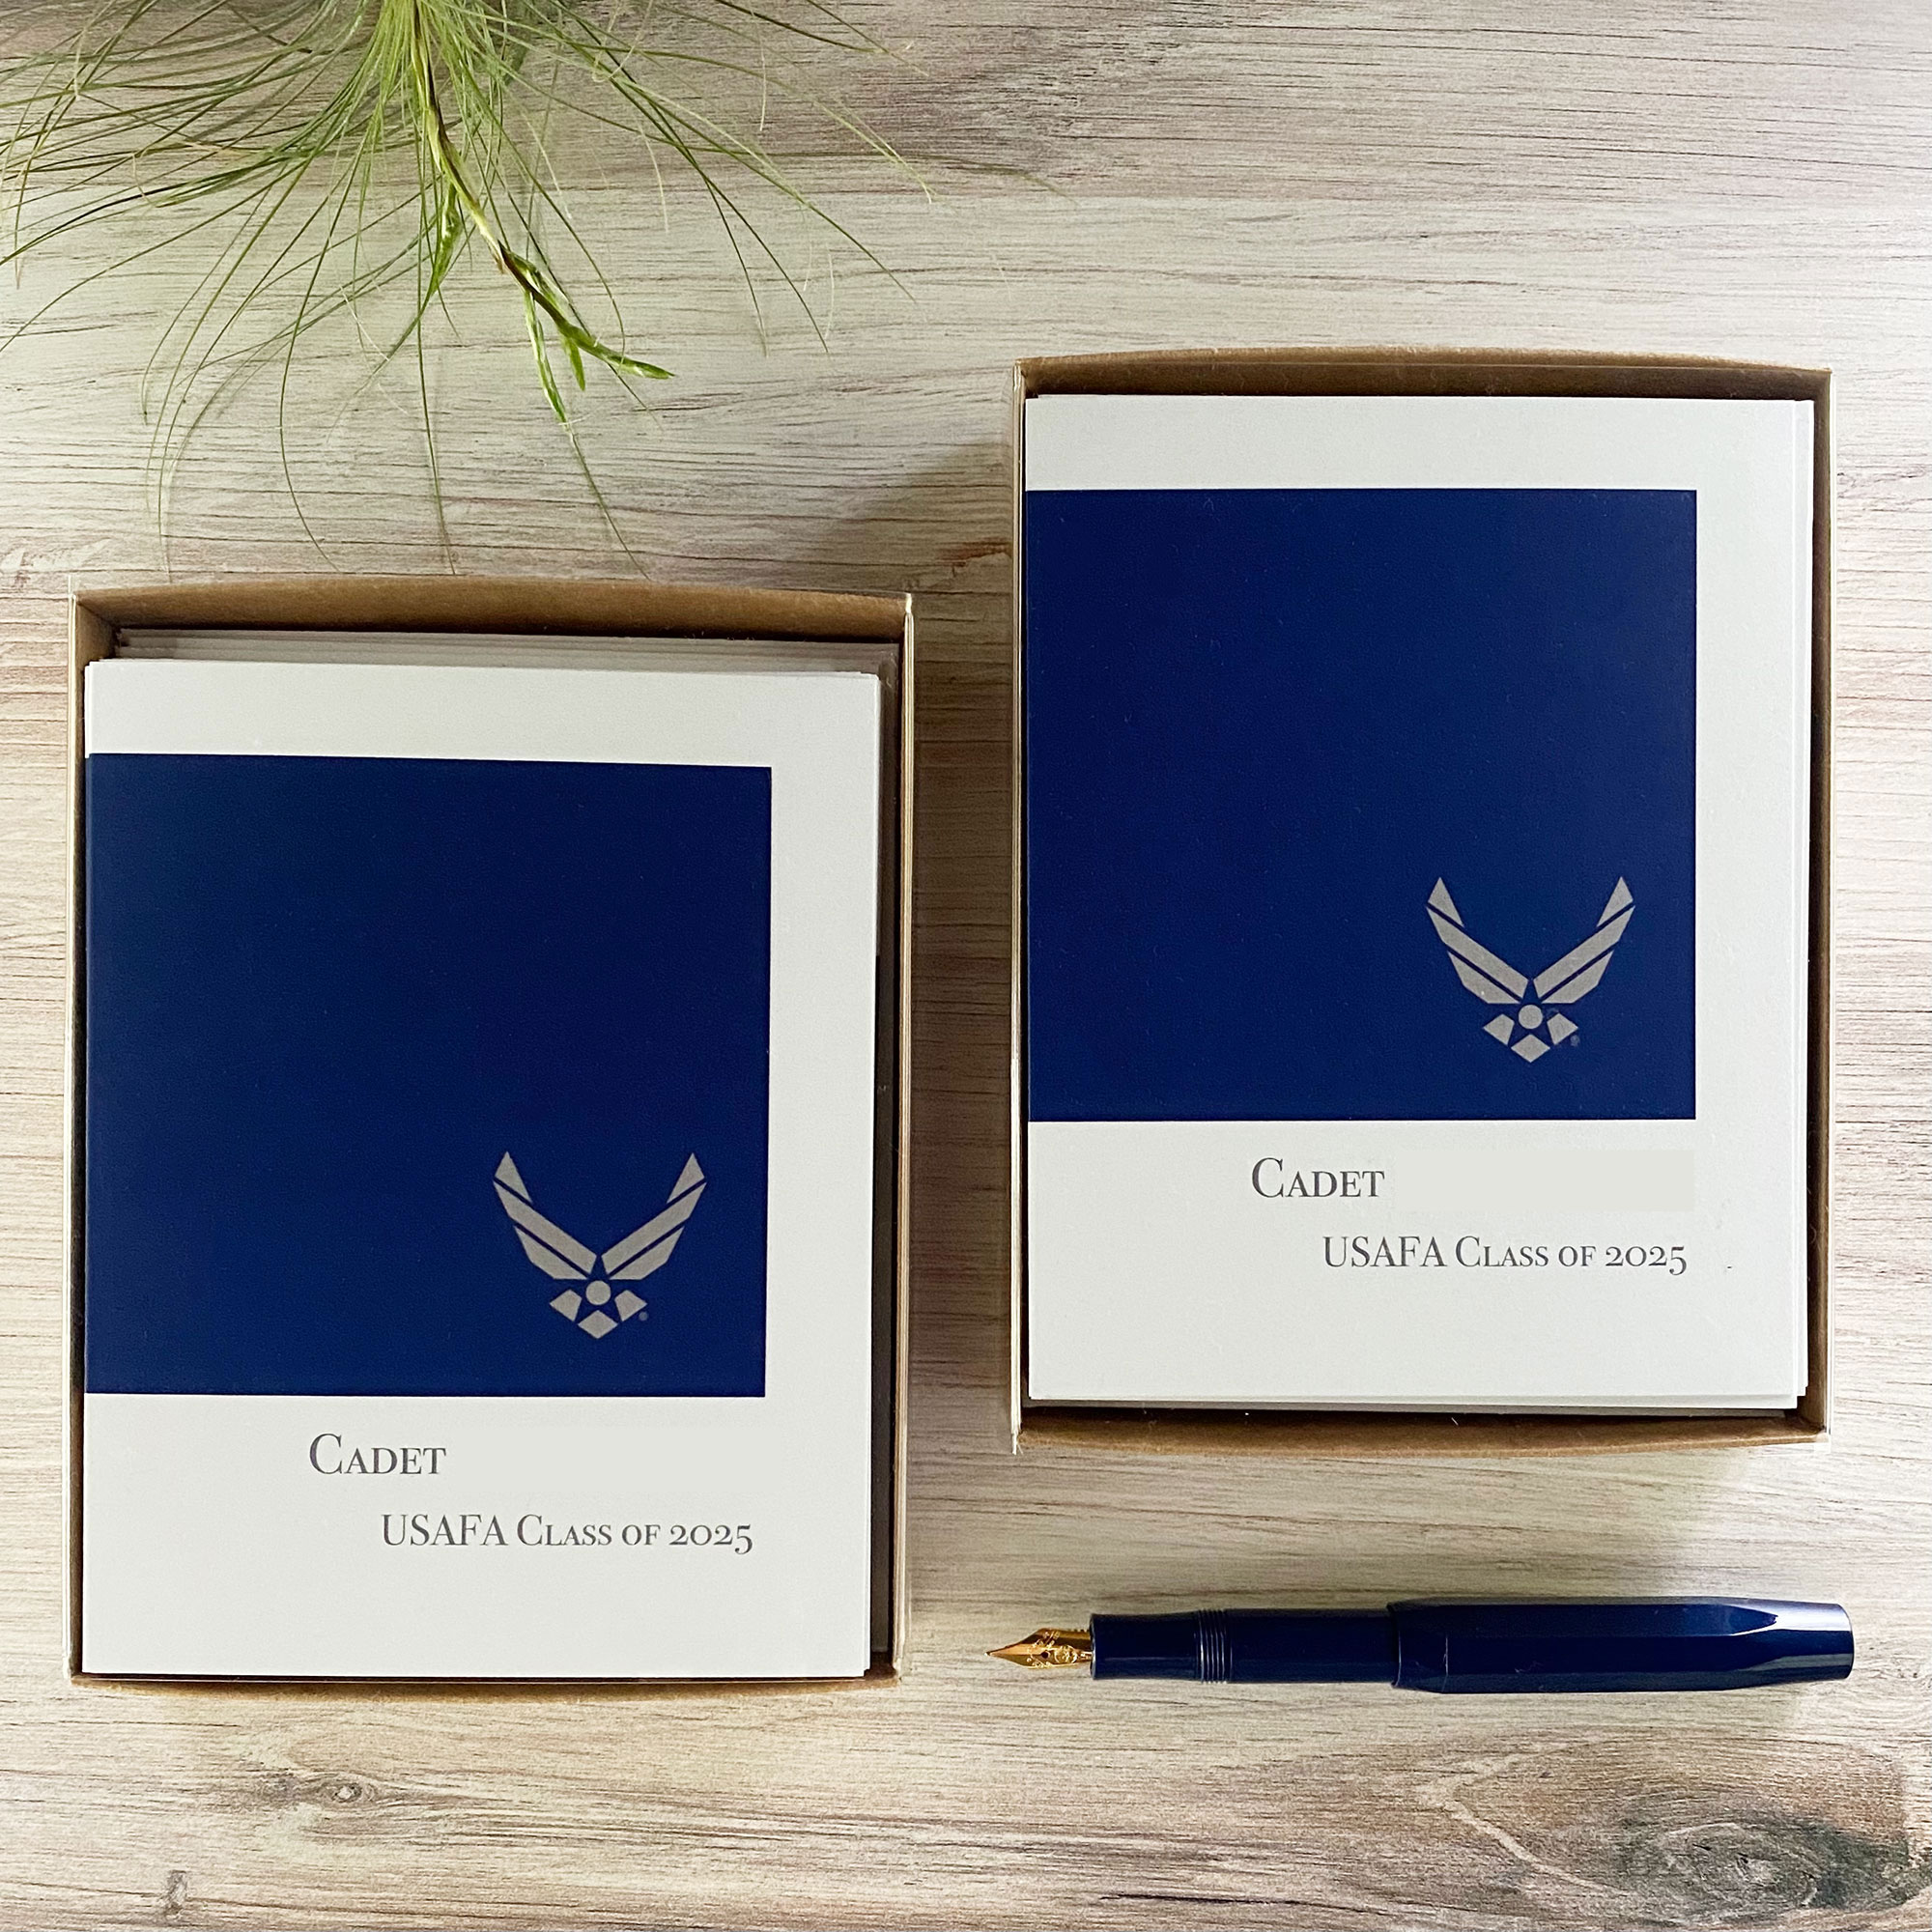 2MyHero personalized custom note cards for a USAFA cadet